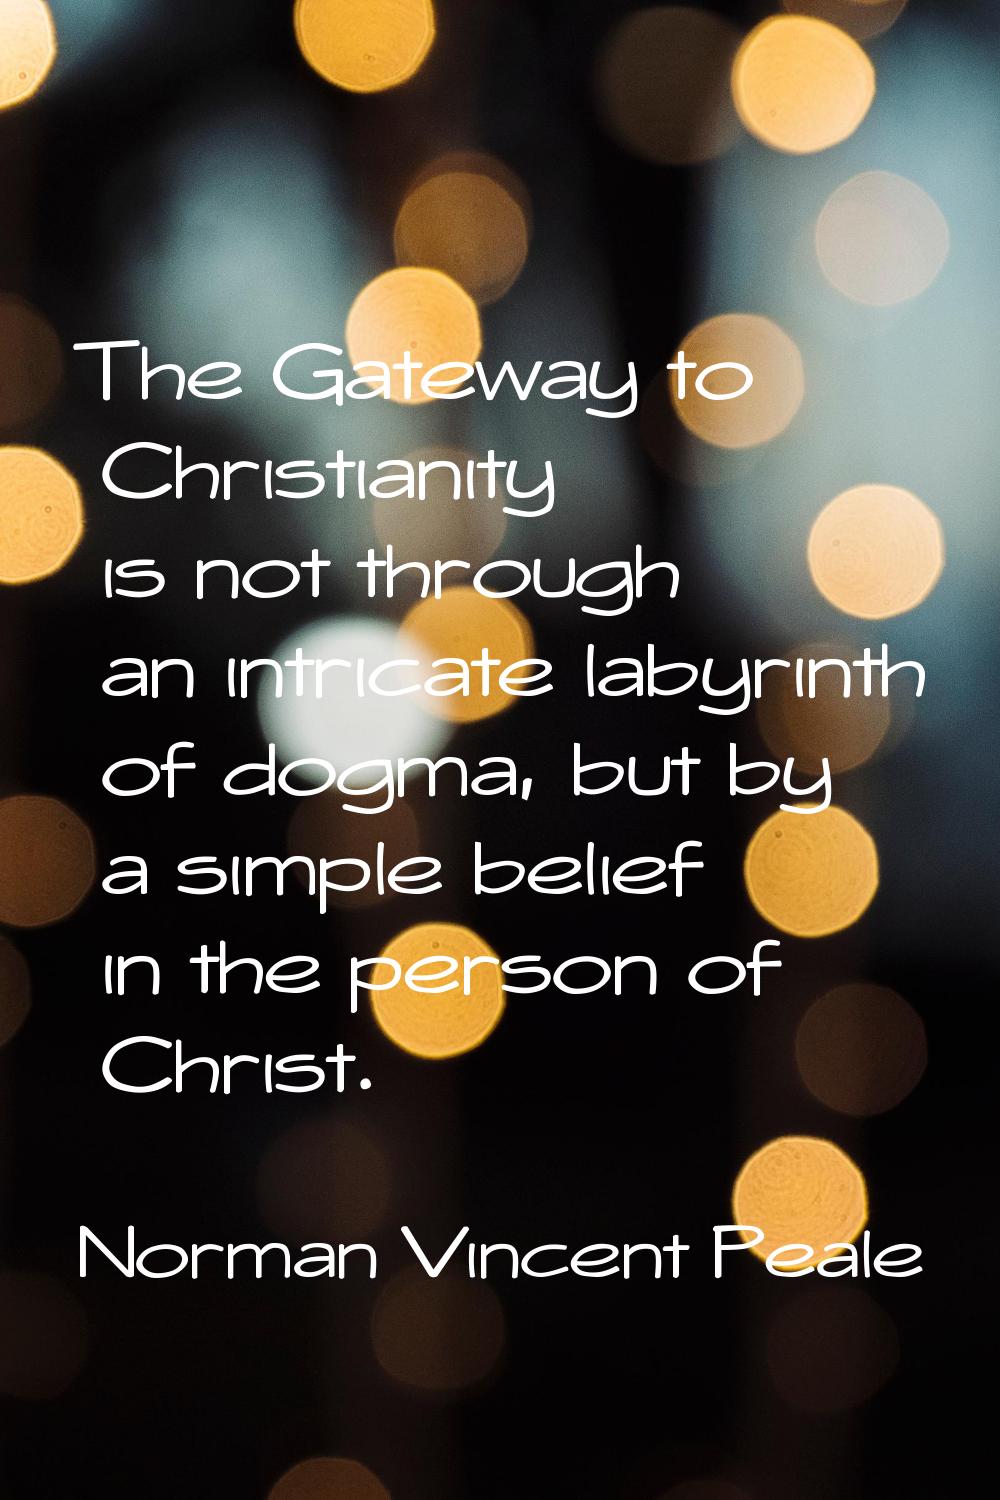 The Gateway to Christianity is not through an intricate labyrinth of dogma, but by a simple belief 